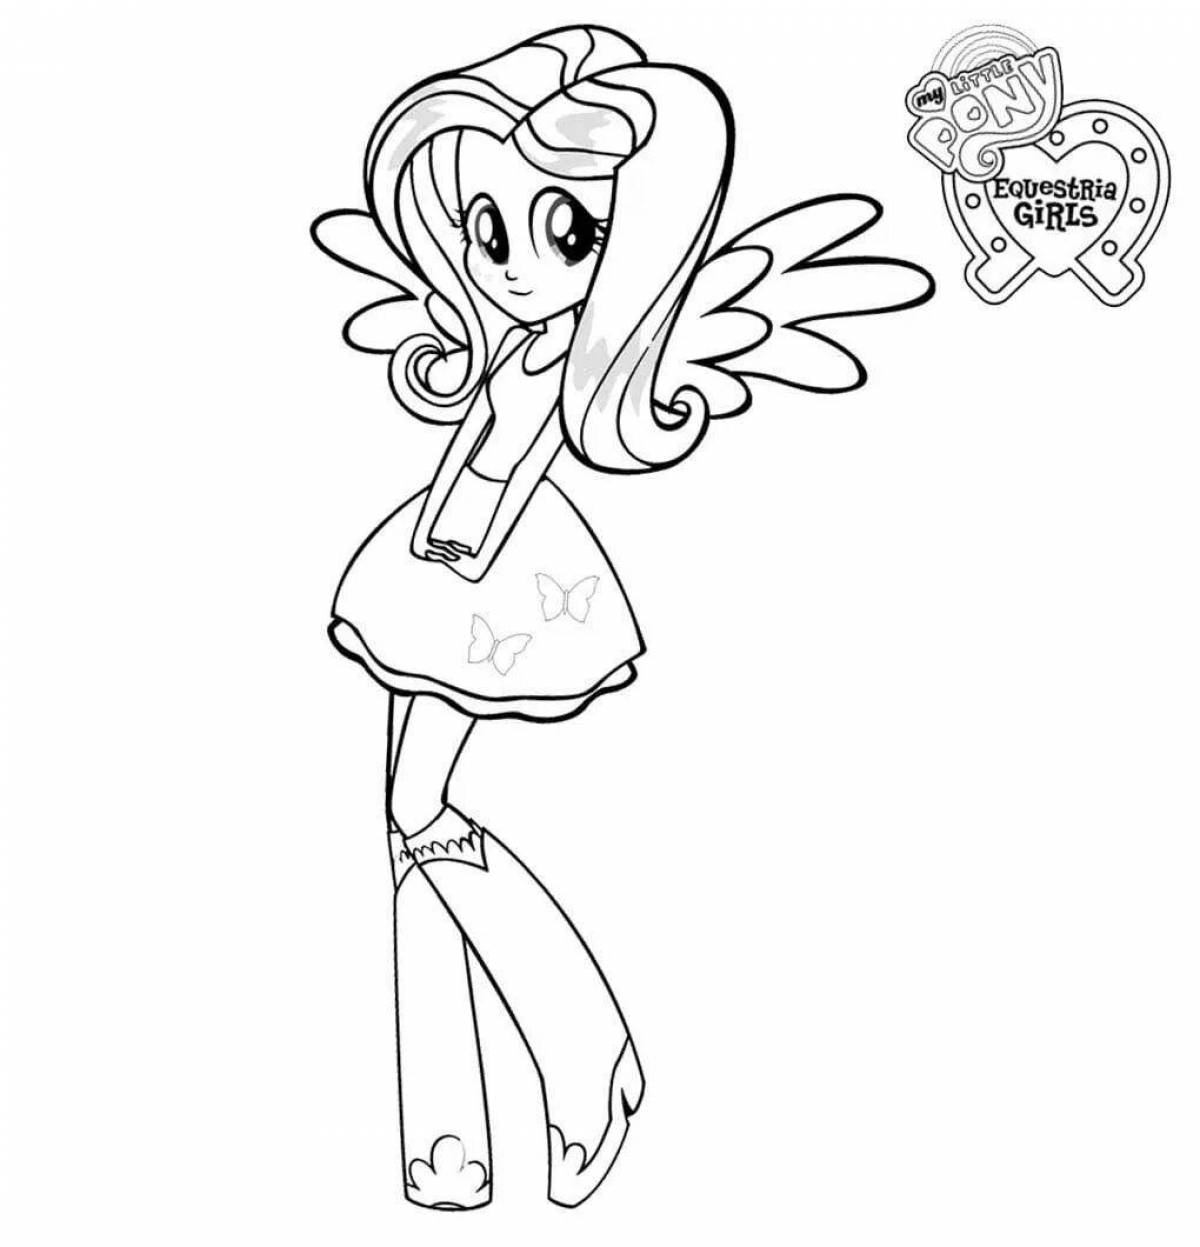 Pinky pie's vibrant coloring page